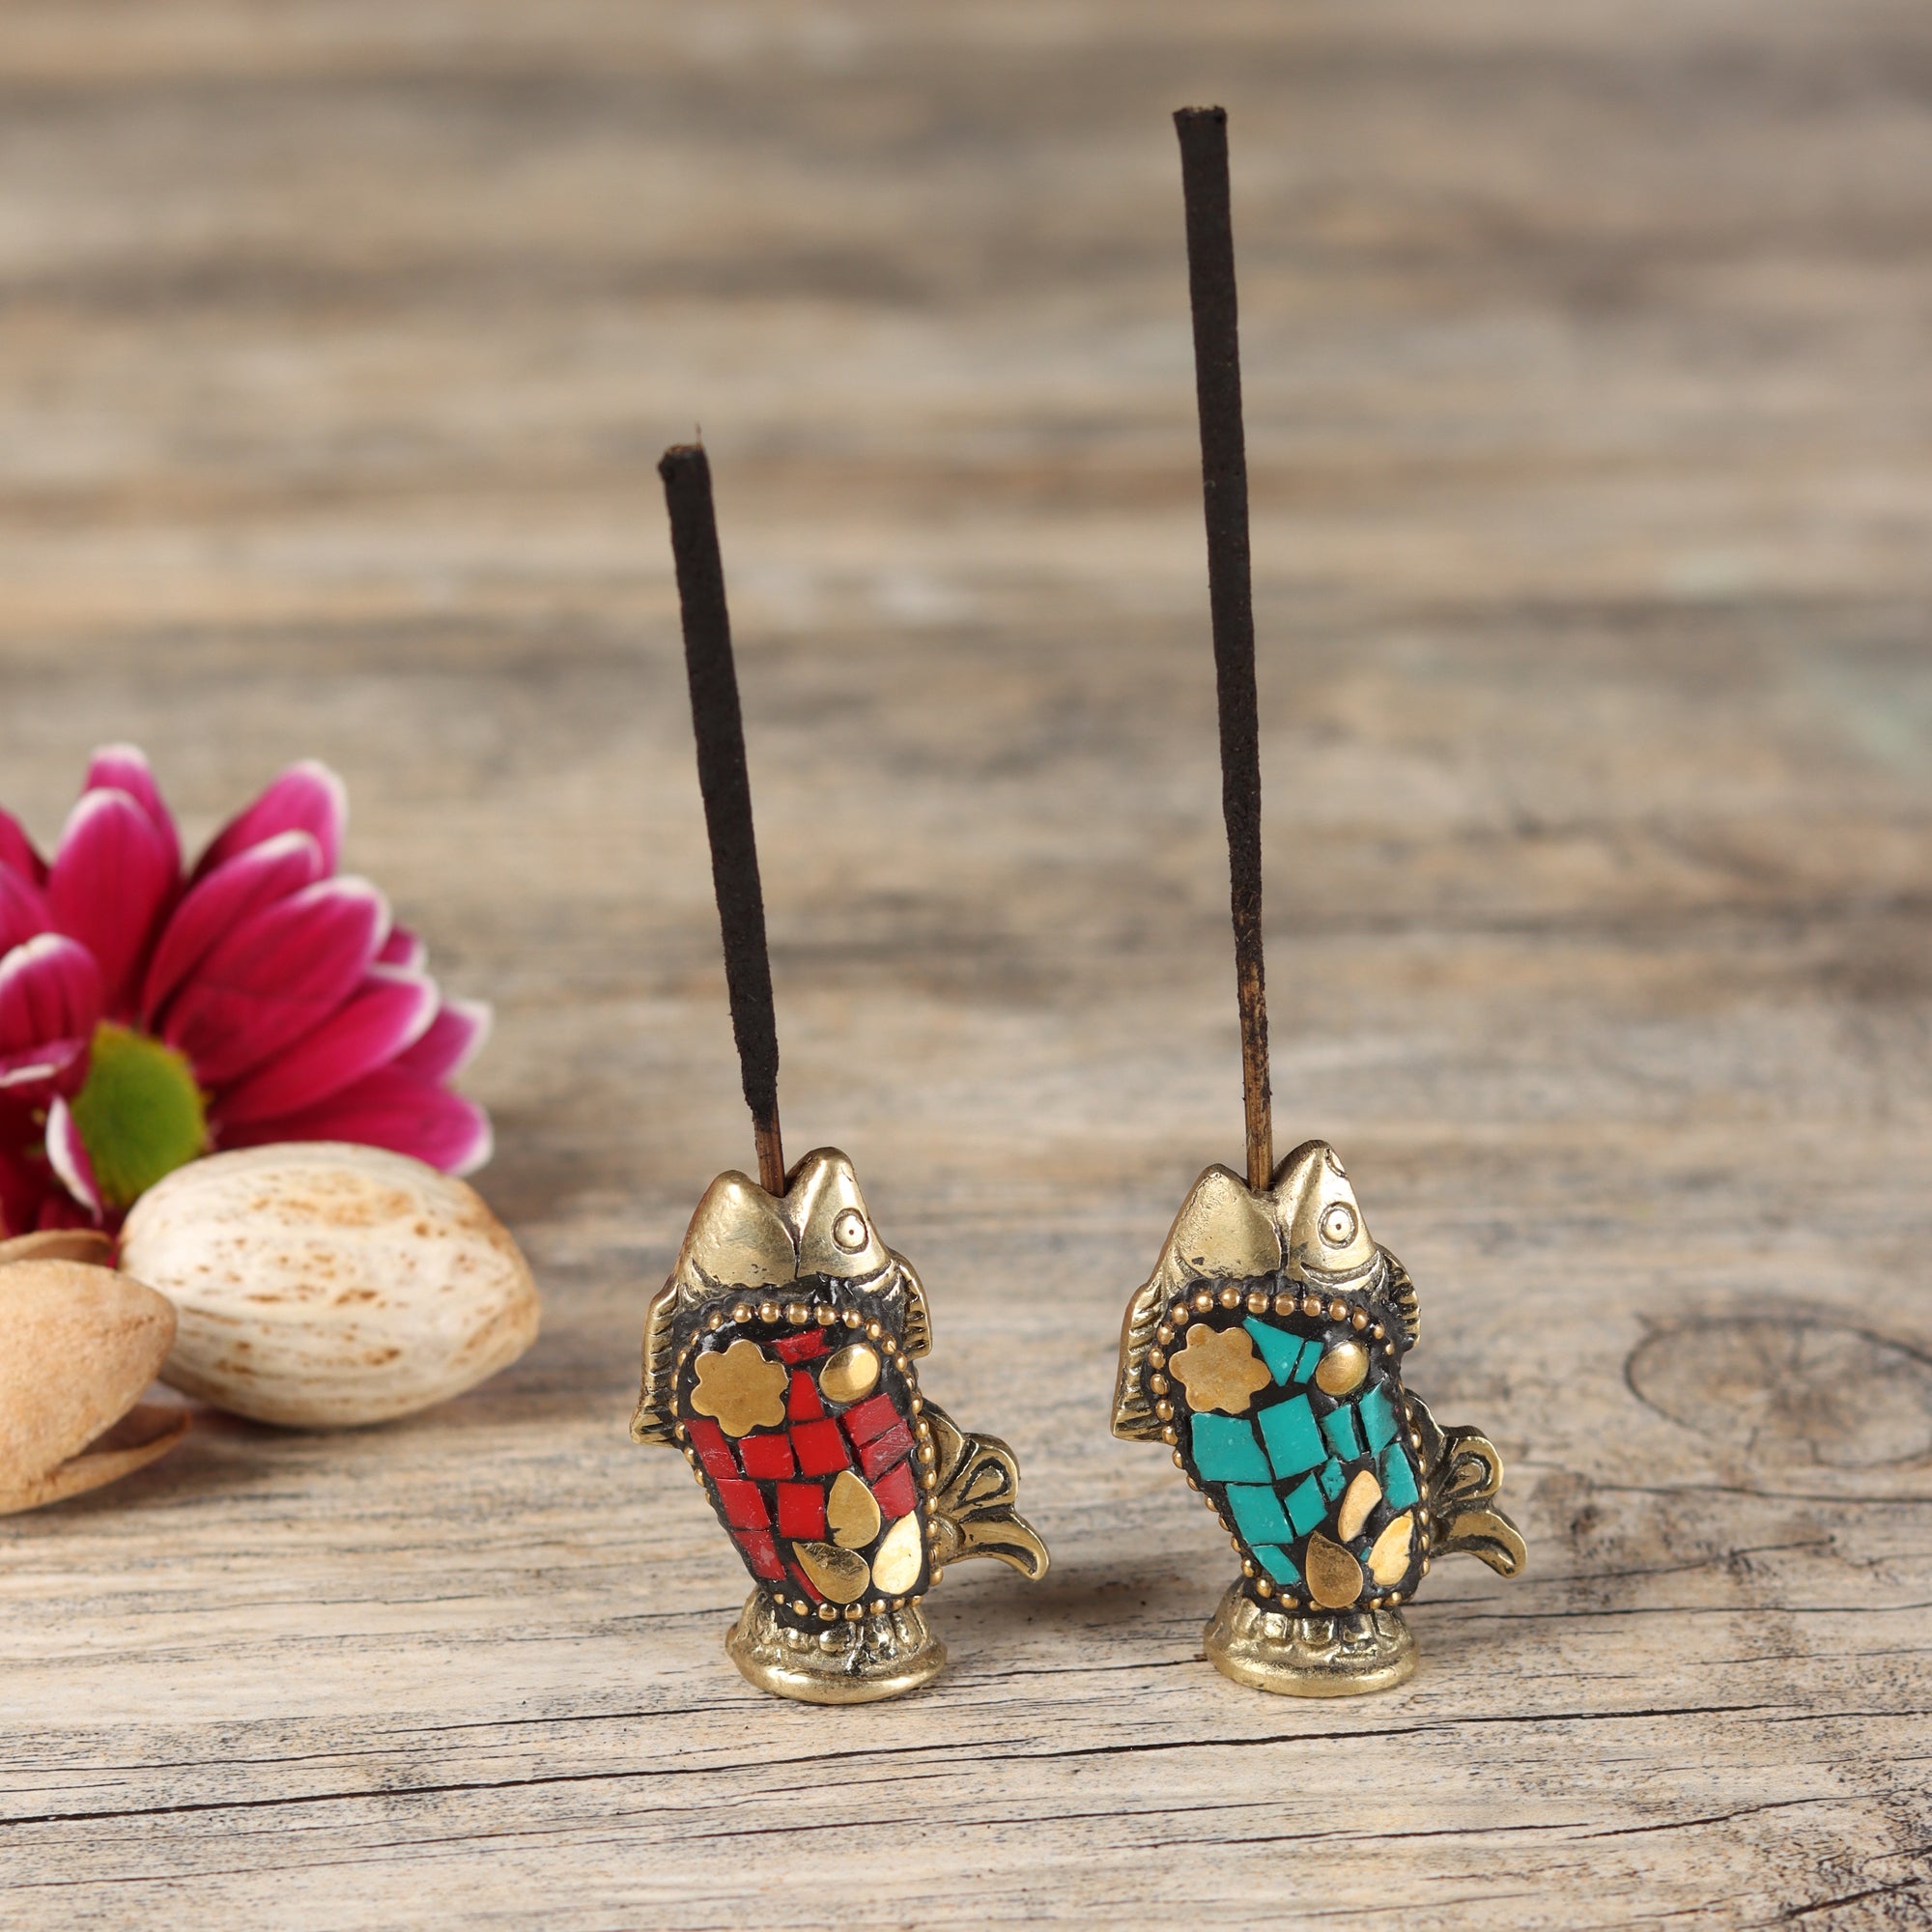 Tiny Fish - Incense Holders (set of 2)